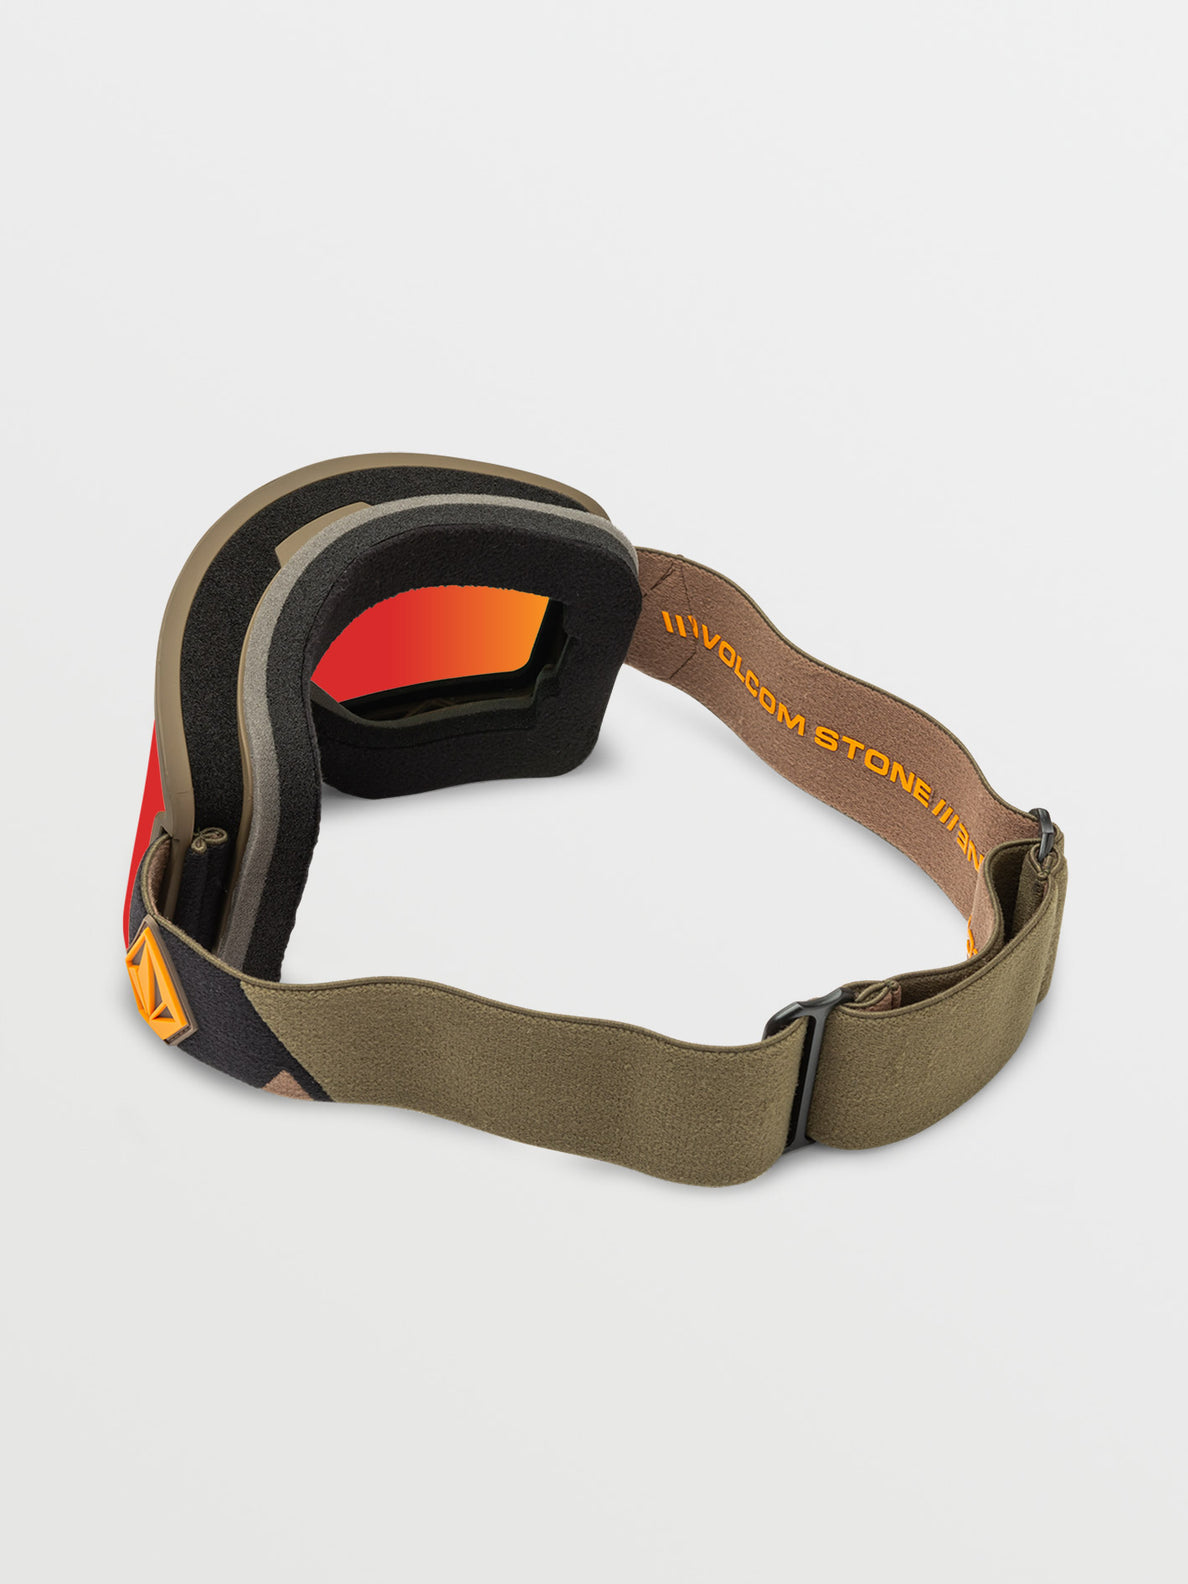 Garden Goggle - Military / Red Chrome +BL